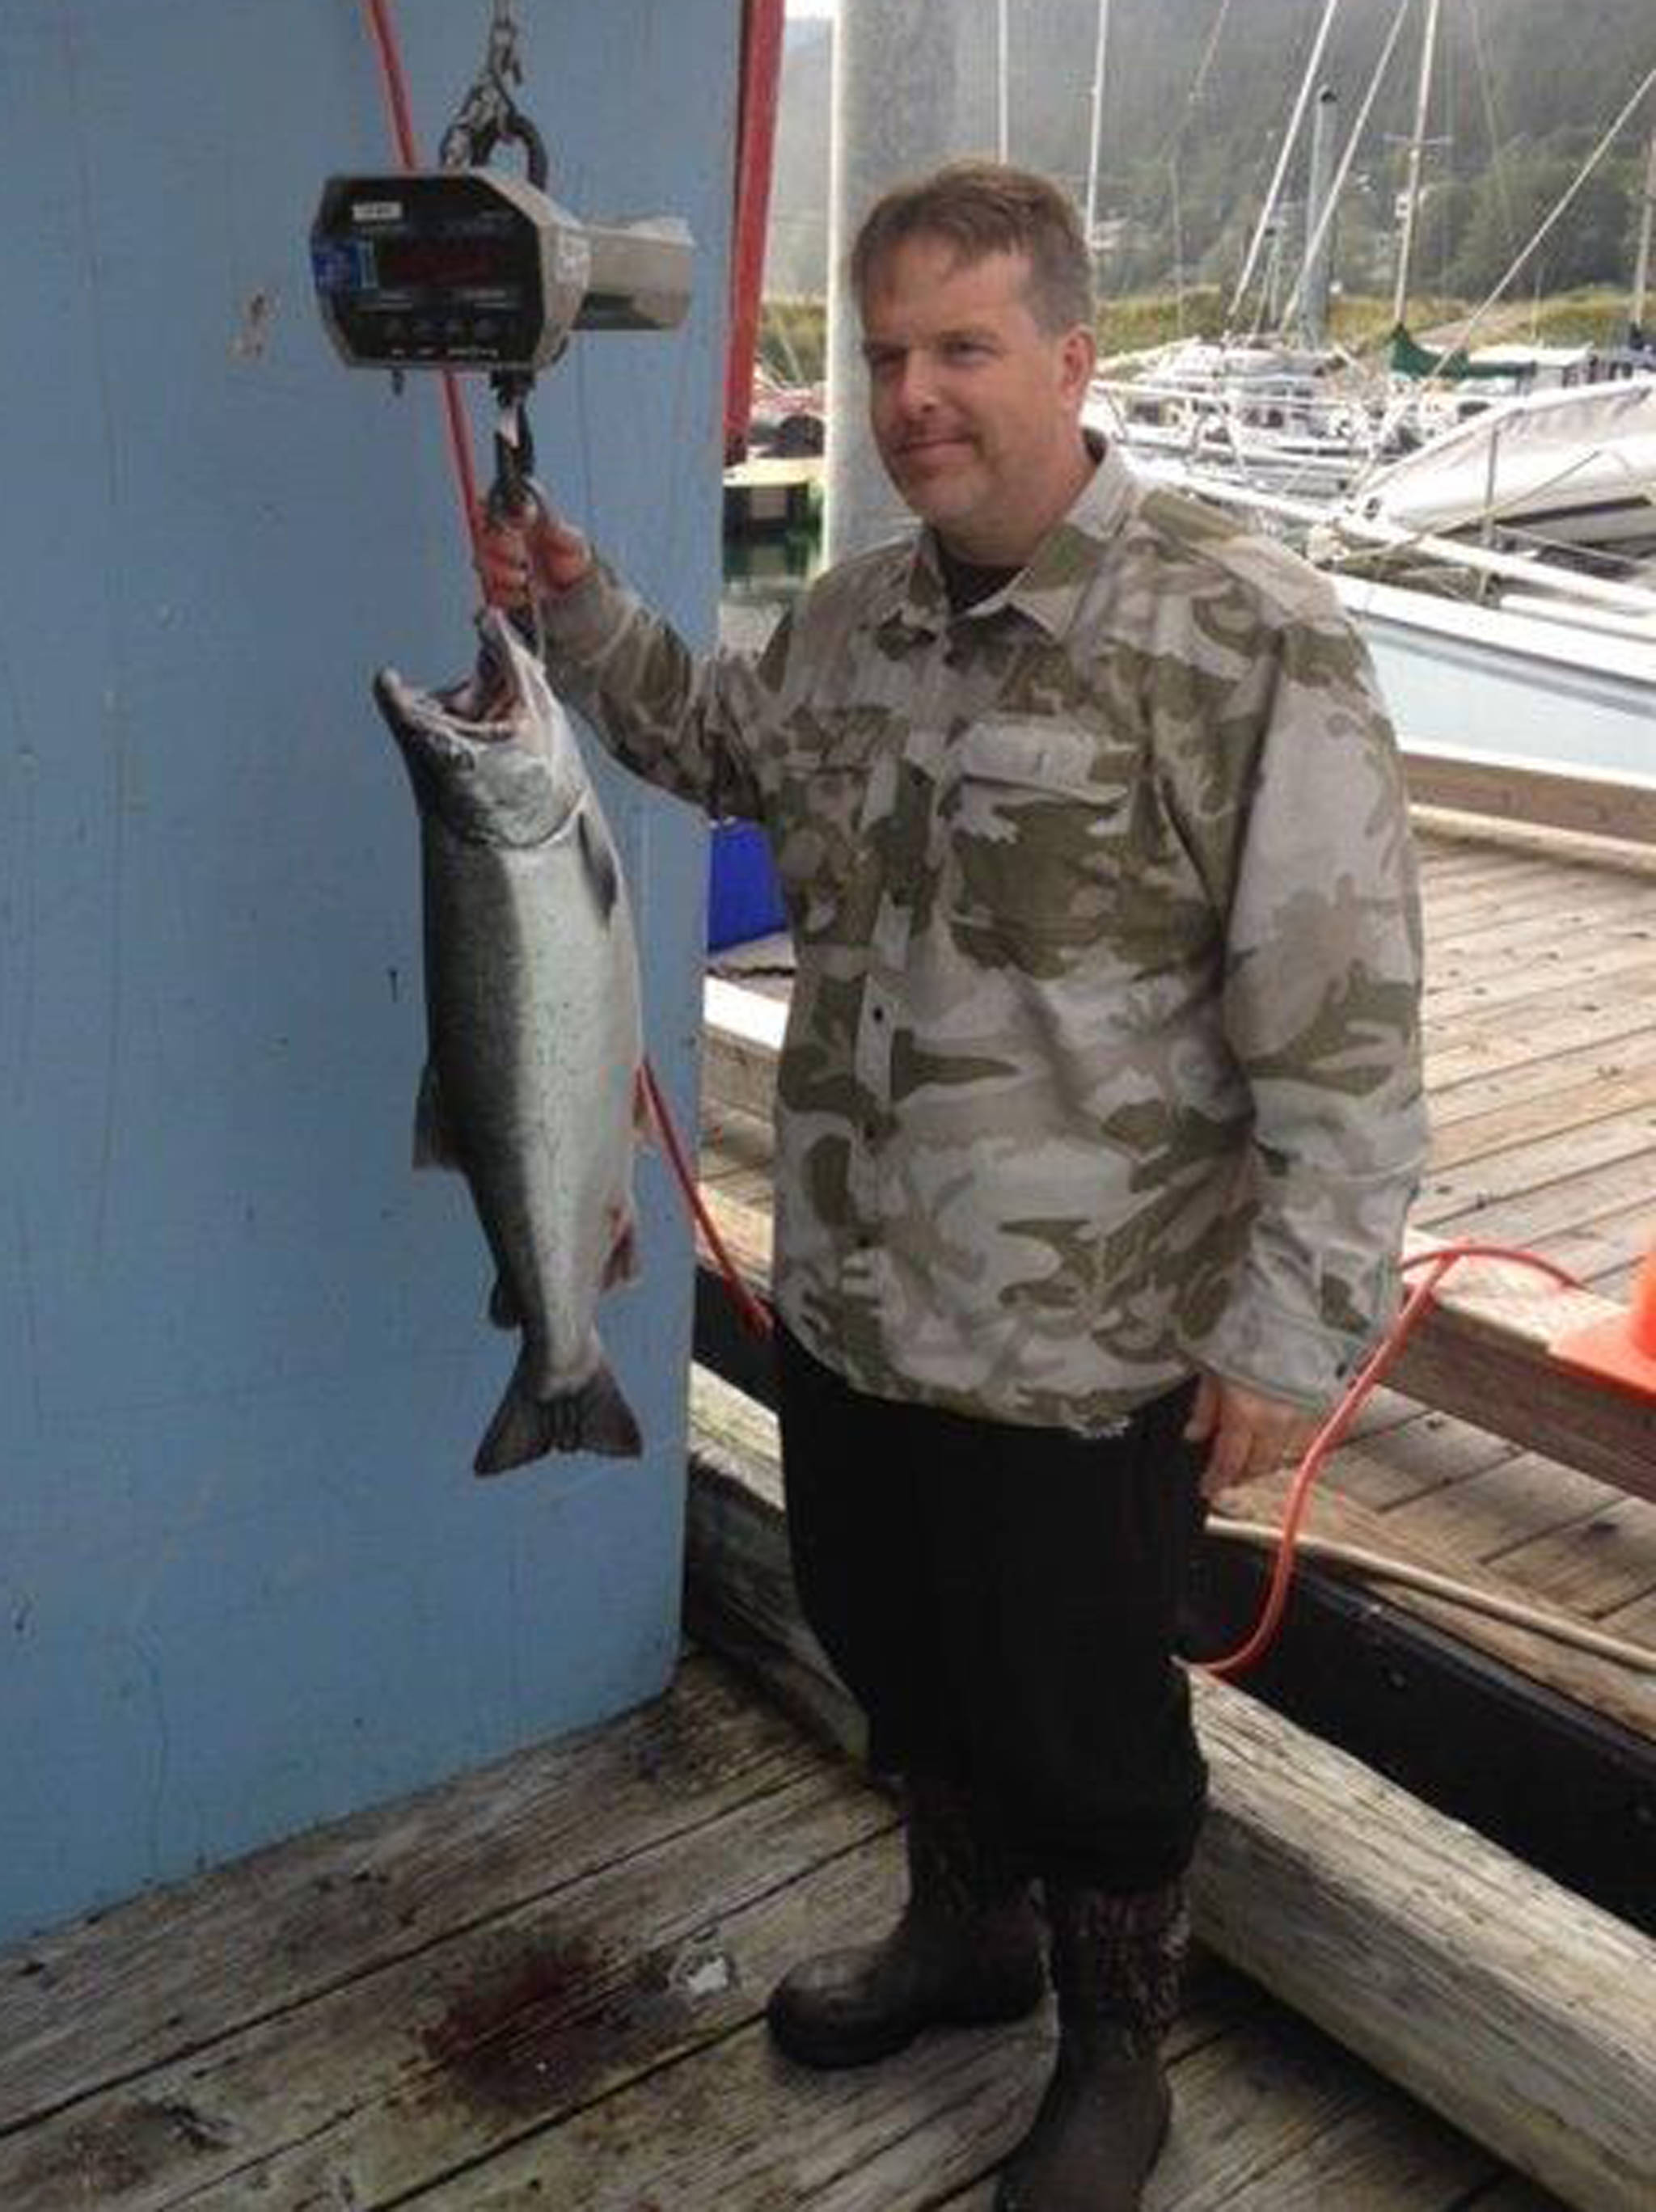 James McKnight holds a coho salmon he caught on Saturday, Aug. 18, 2018 at the Golden North Salmon Derby. The fish, weighed at 17.7 pounds, was the largest one caught at the derby. (Courtesy Photo | Derby Committee)